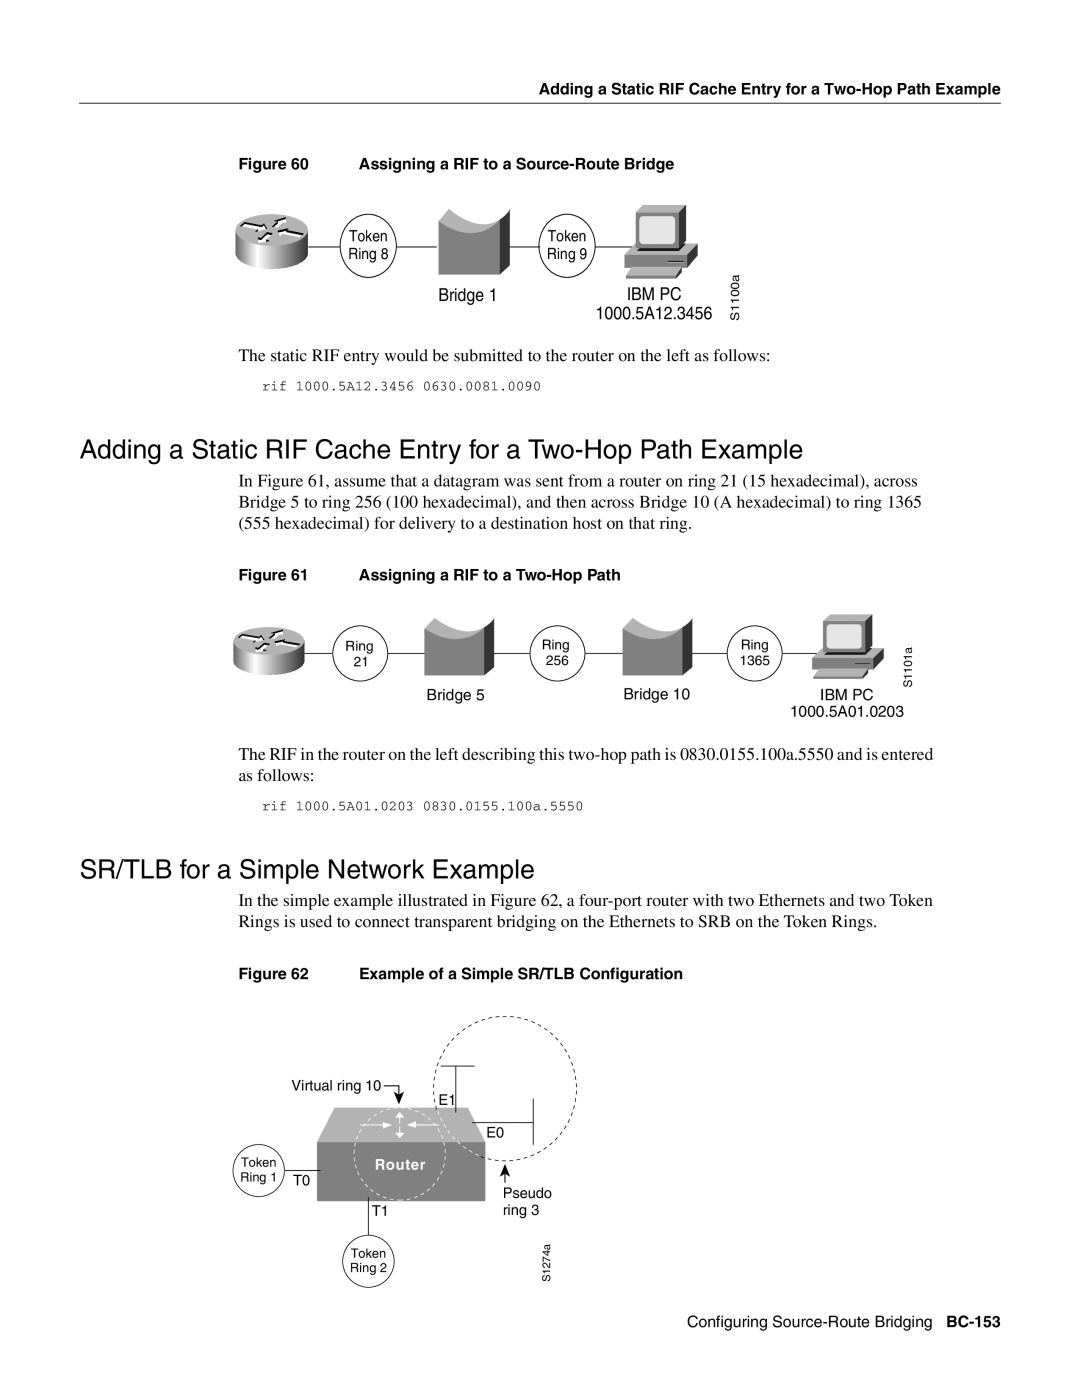 Cisco Systems BC-109 manual Adding a Static RIF Cache Entry for a Two-Hop Path Example, SR/TLB for a Simple Network Example 